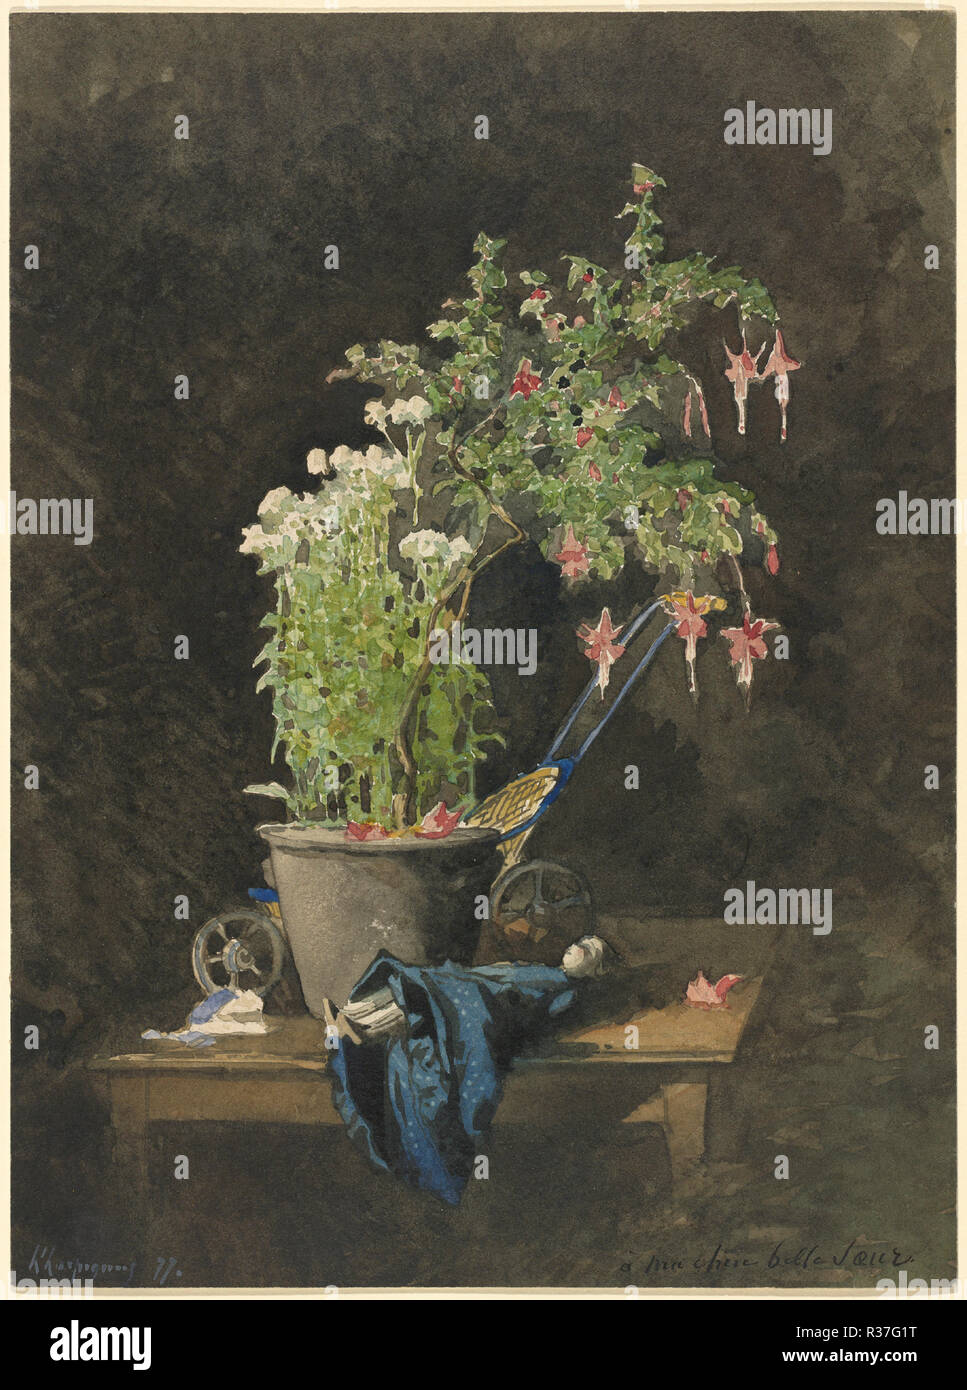 A Potted Fuchsia with Children's Toys. Dated: 1877. Dimensions: overall: 34 x 25 cm (13 3/8 x 9 13/16 in.). Medium: watercolor. Museum: National Gallery of Art, Washington DC. Author: Henri-Joseph Harpignies. Stock Photo